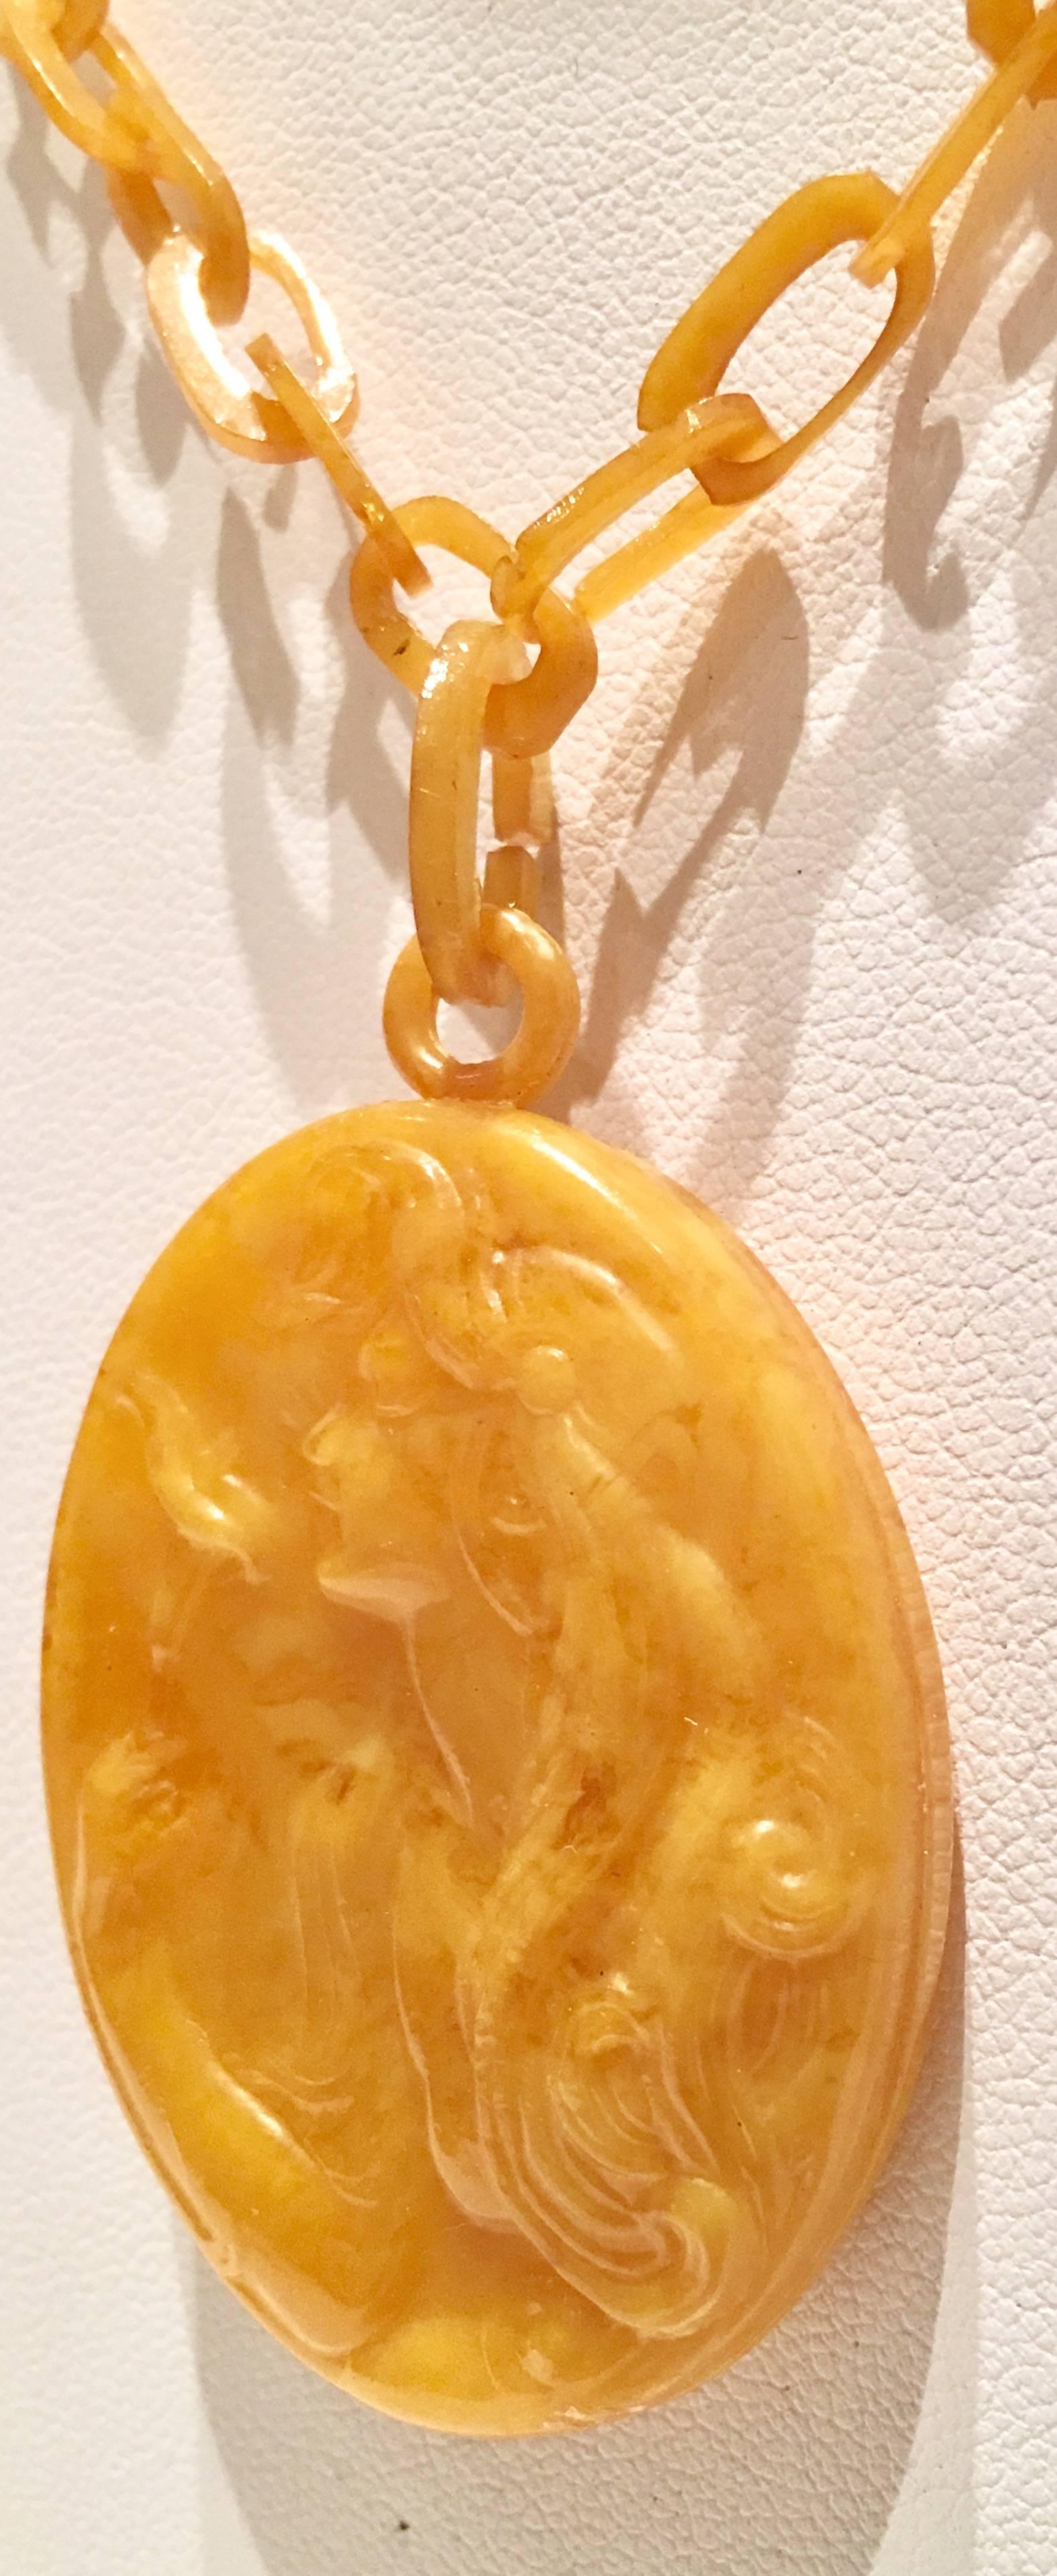 Art Nouveau Bakelite & Celluloid Carved High Relief Cameo Chain Link Pendant Necklace. The double sided pendant, features a butterscotch Bakelite double sided carved high relief female with flowing hair, holding a flower. The necklace is made of